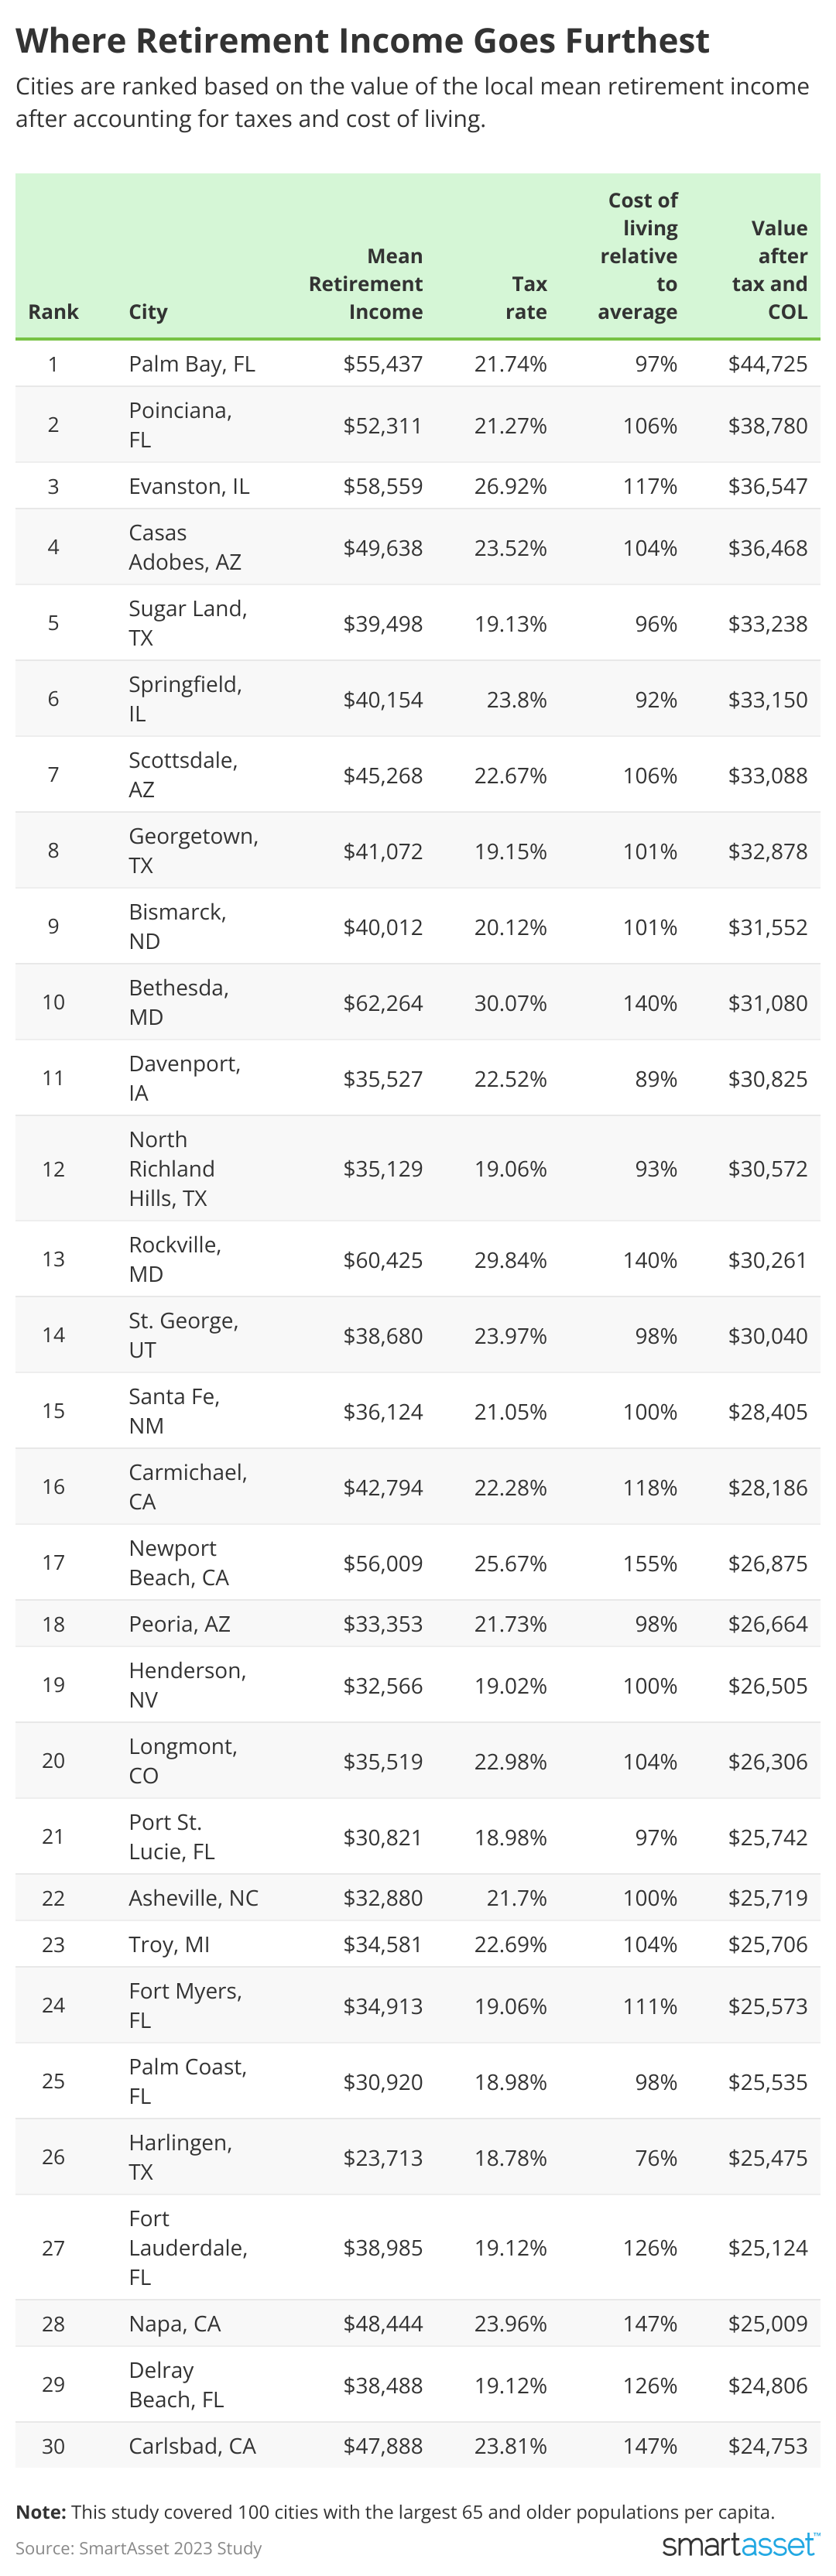 A chart listing 30 U.S. cities based on the effective value of their retirement income after considering taxes and the cost of living.